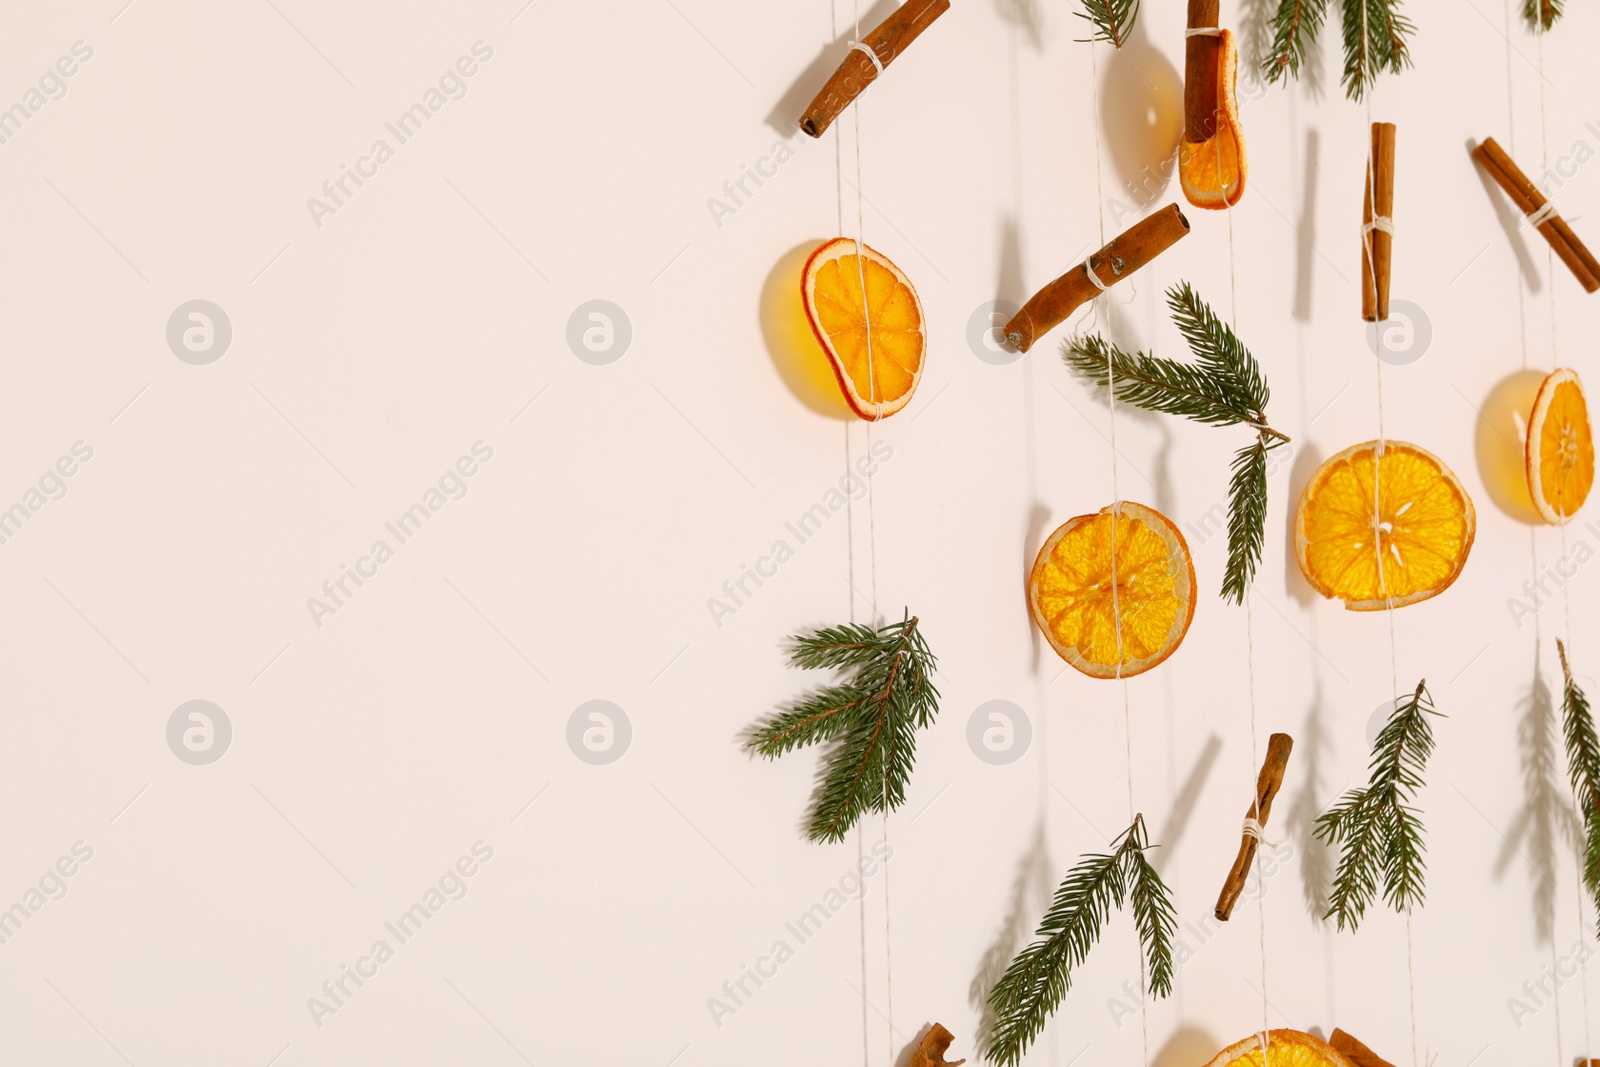 Photo of Handmade decor of dry orange slices, cinnamon sticks and fir tree branches on white wall, closeup. Space for text